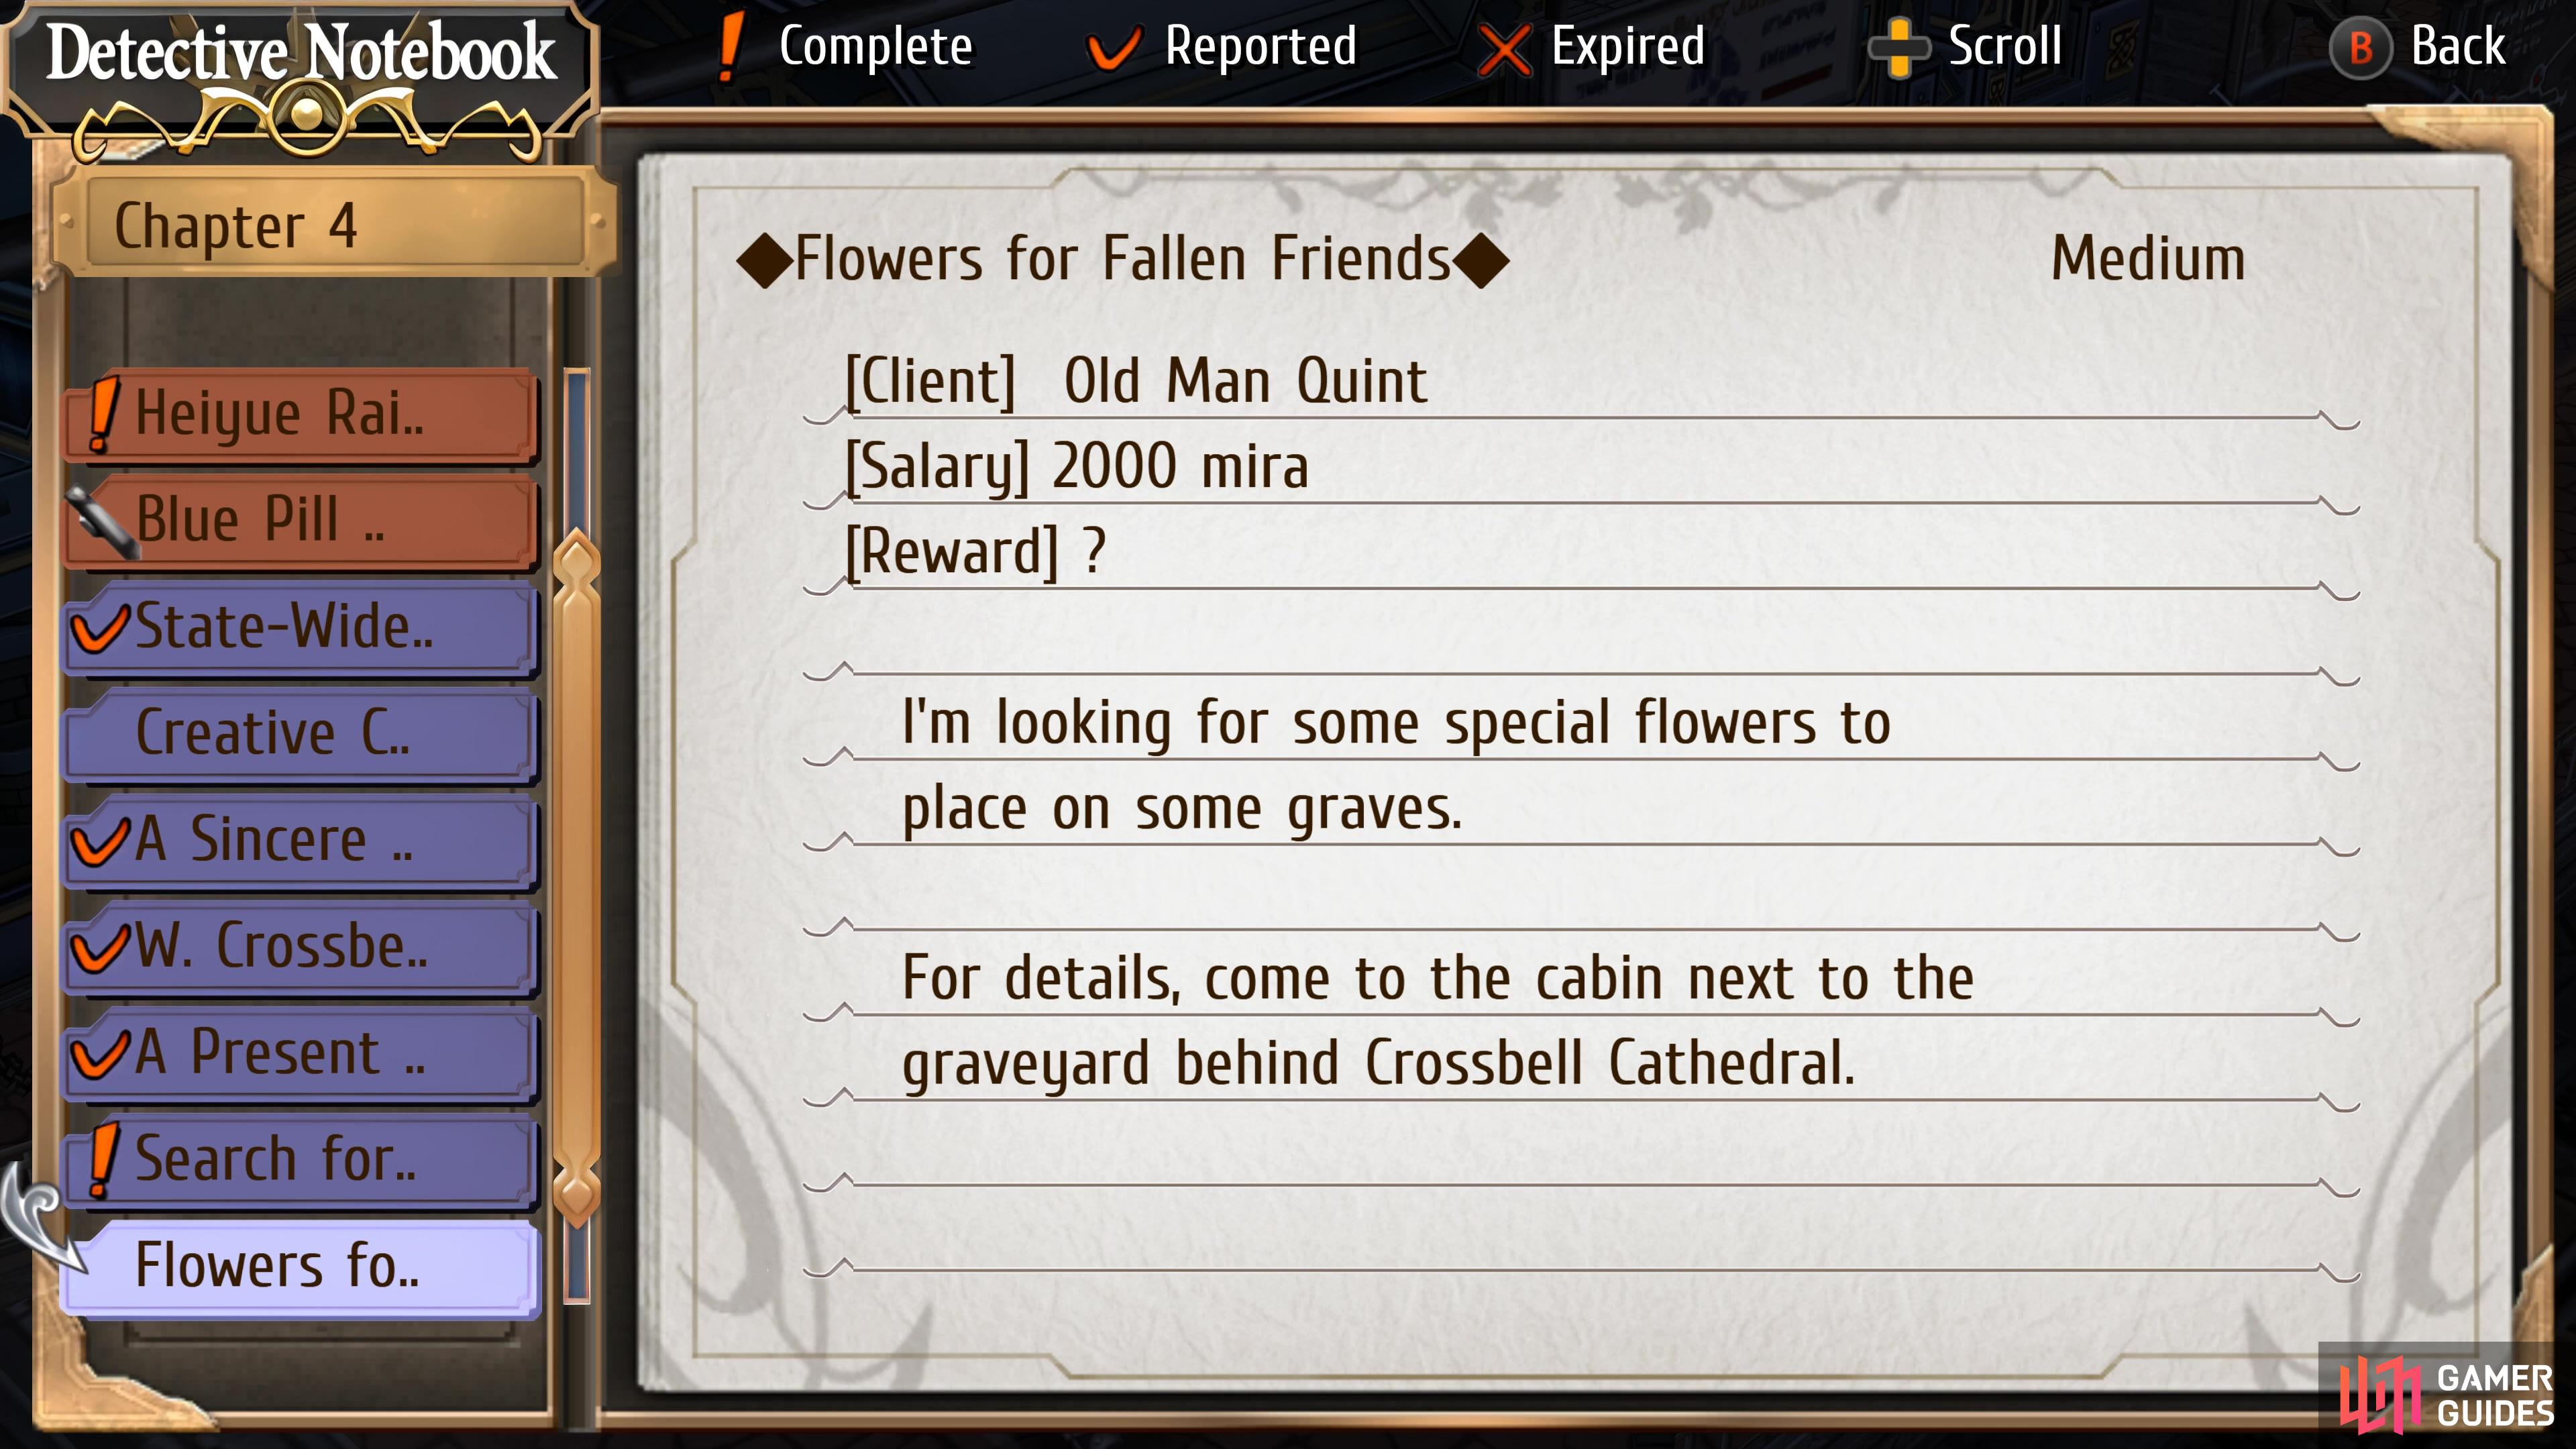 Flowers for Fallen Friends is a request on Chapter 4 Day 2.